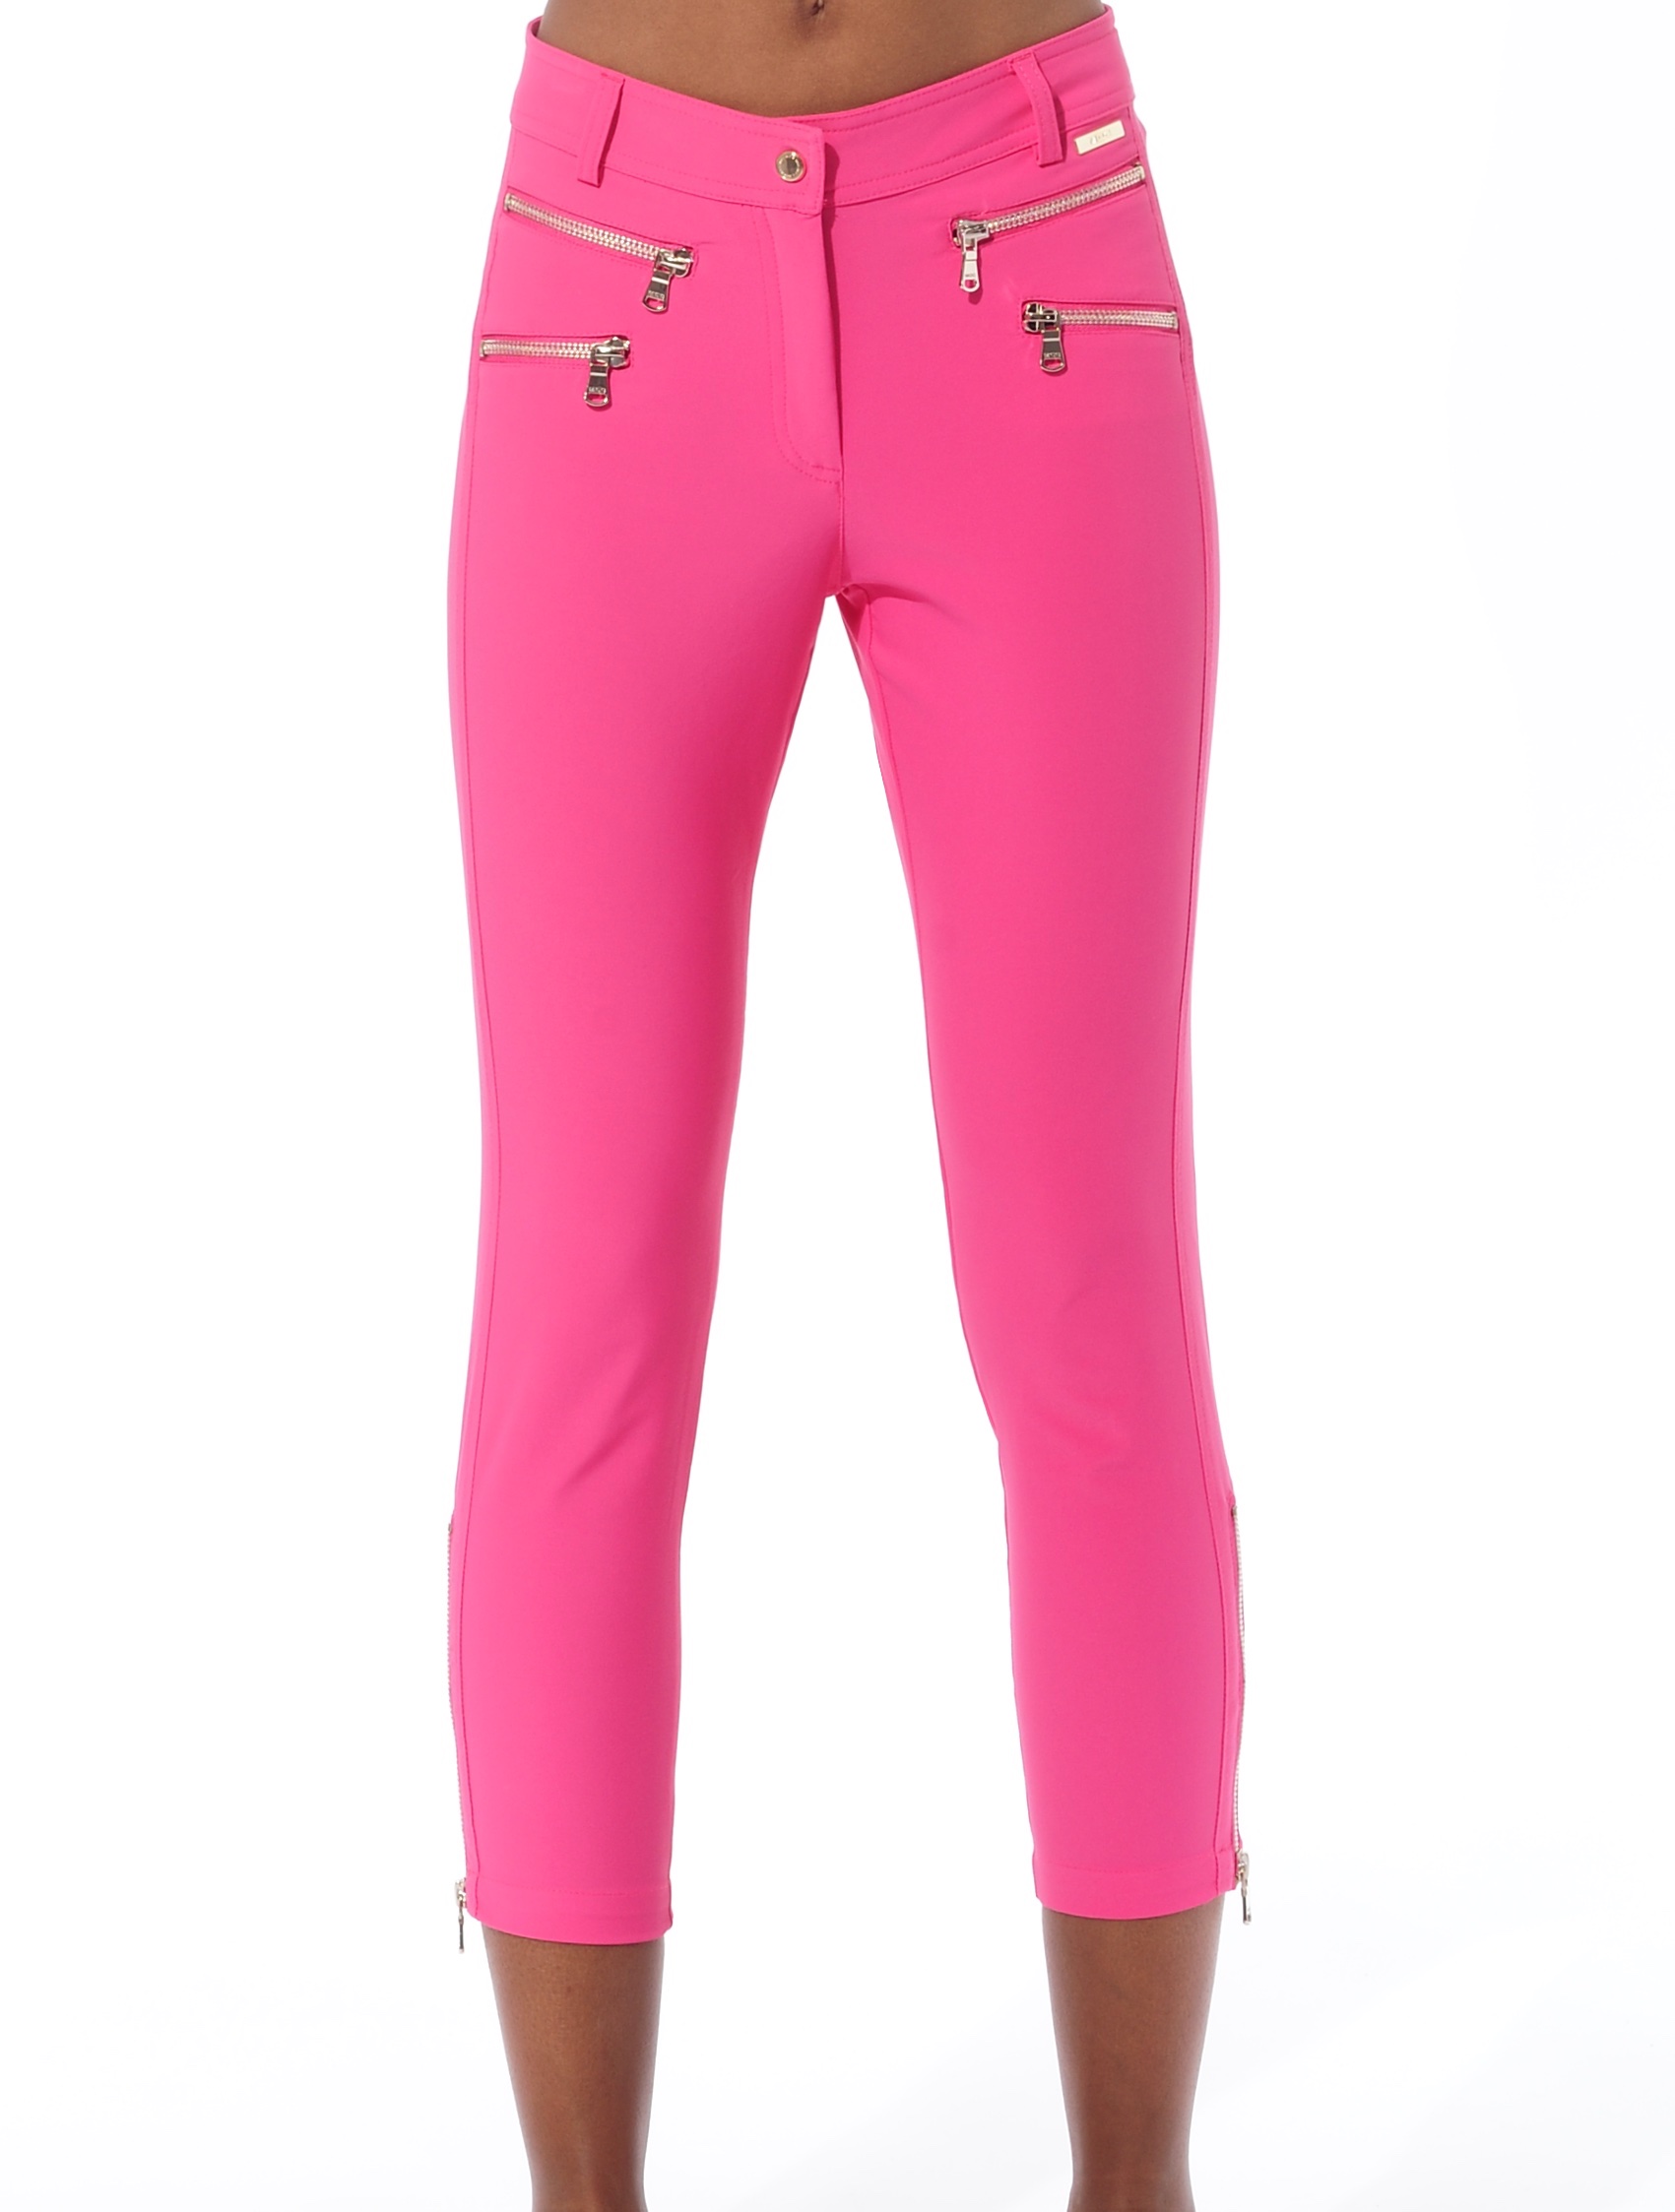 4way stretch double zip cropped pants flamingo 